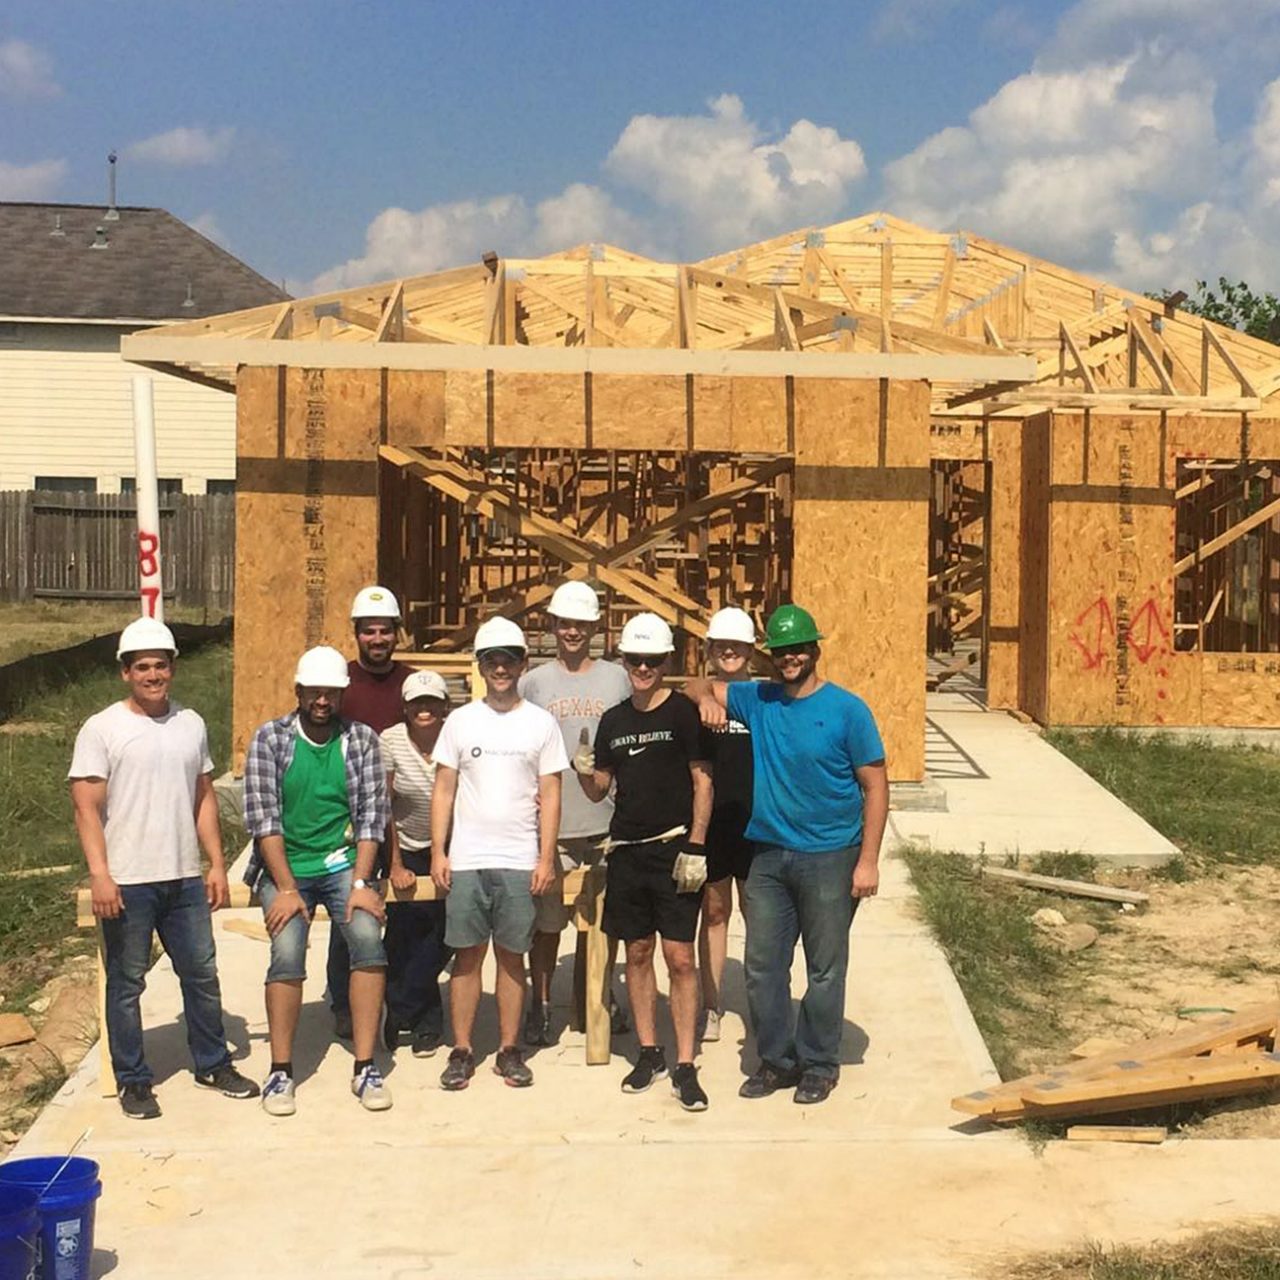 Houston staff helped build a home for people in need